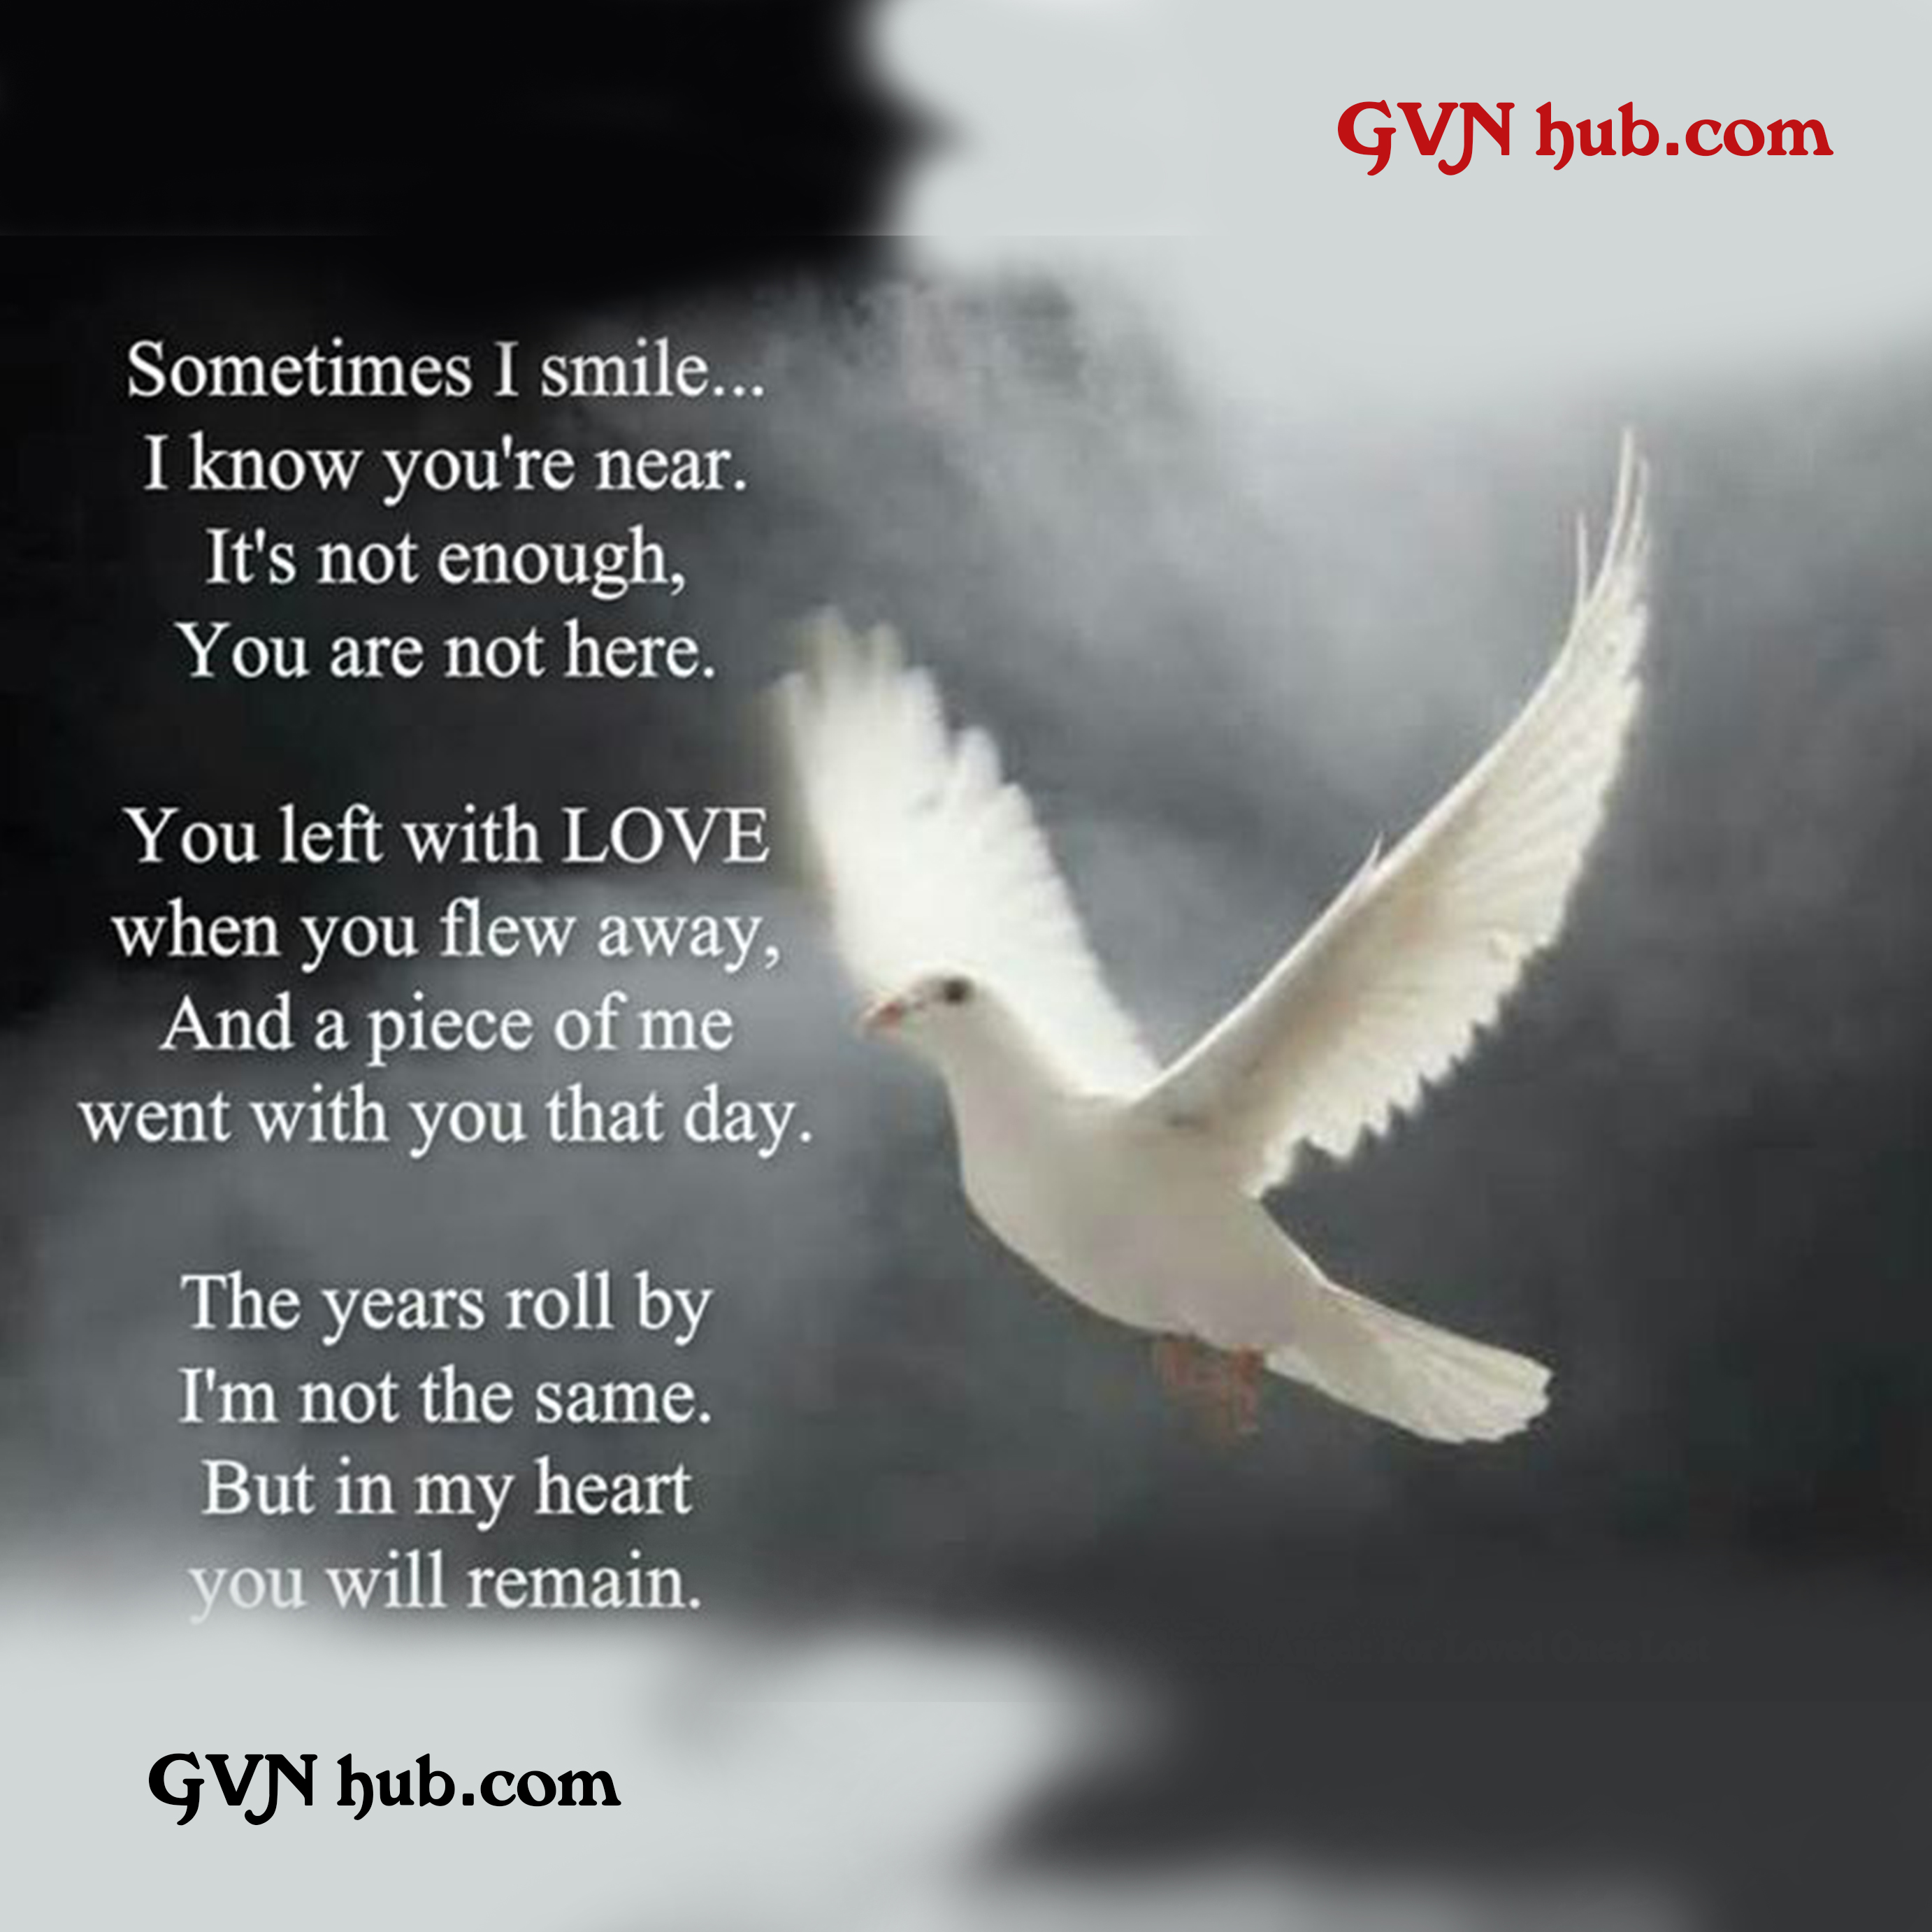 15 Best Heart Touching Miss You Quotes - GVN Hub